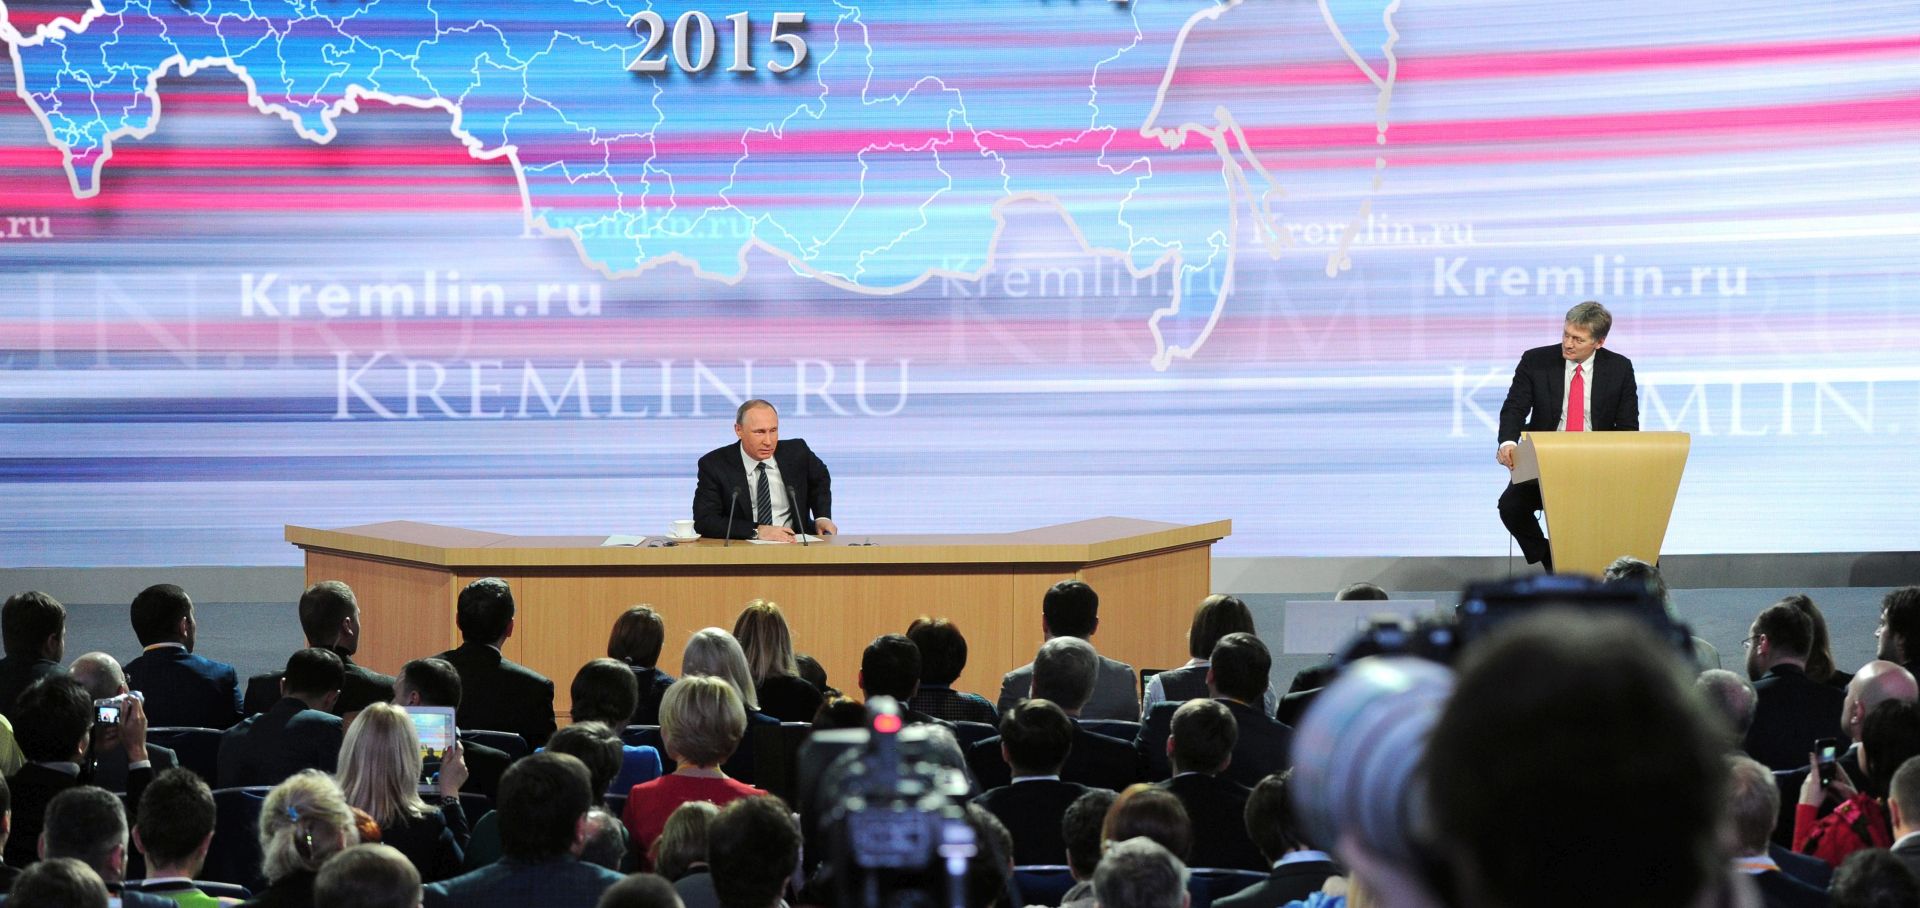 epa05072056 Russian President Vladimir Putin (Back L) and his press Secretary Dmitry Peskov (Back R) attend the annual news conference of Russian President at the World Trade Center in Moscow, Russia, 17 December 2015. He was expected to address questions on domestic and international issues, especially Russia's involvement in Syria and Ukraine, and its fight against international terrorism.  EPA/MIKHAIL KLIMENTYEV / SPUTNIK / KREMLIN POOL MANDATORY CREDIT